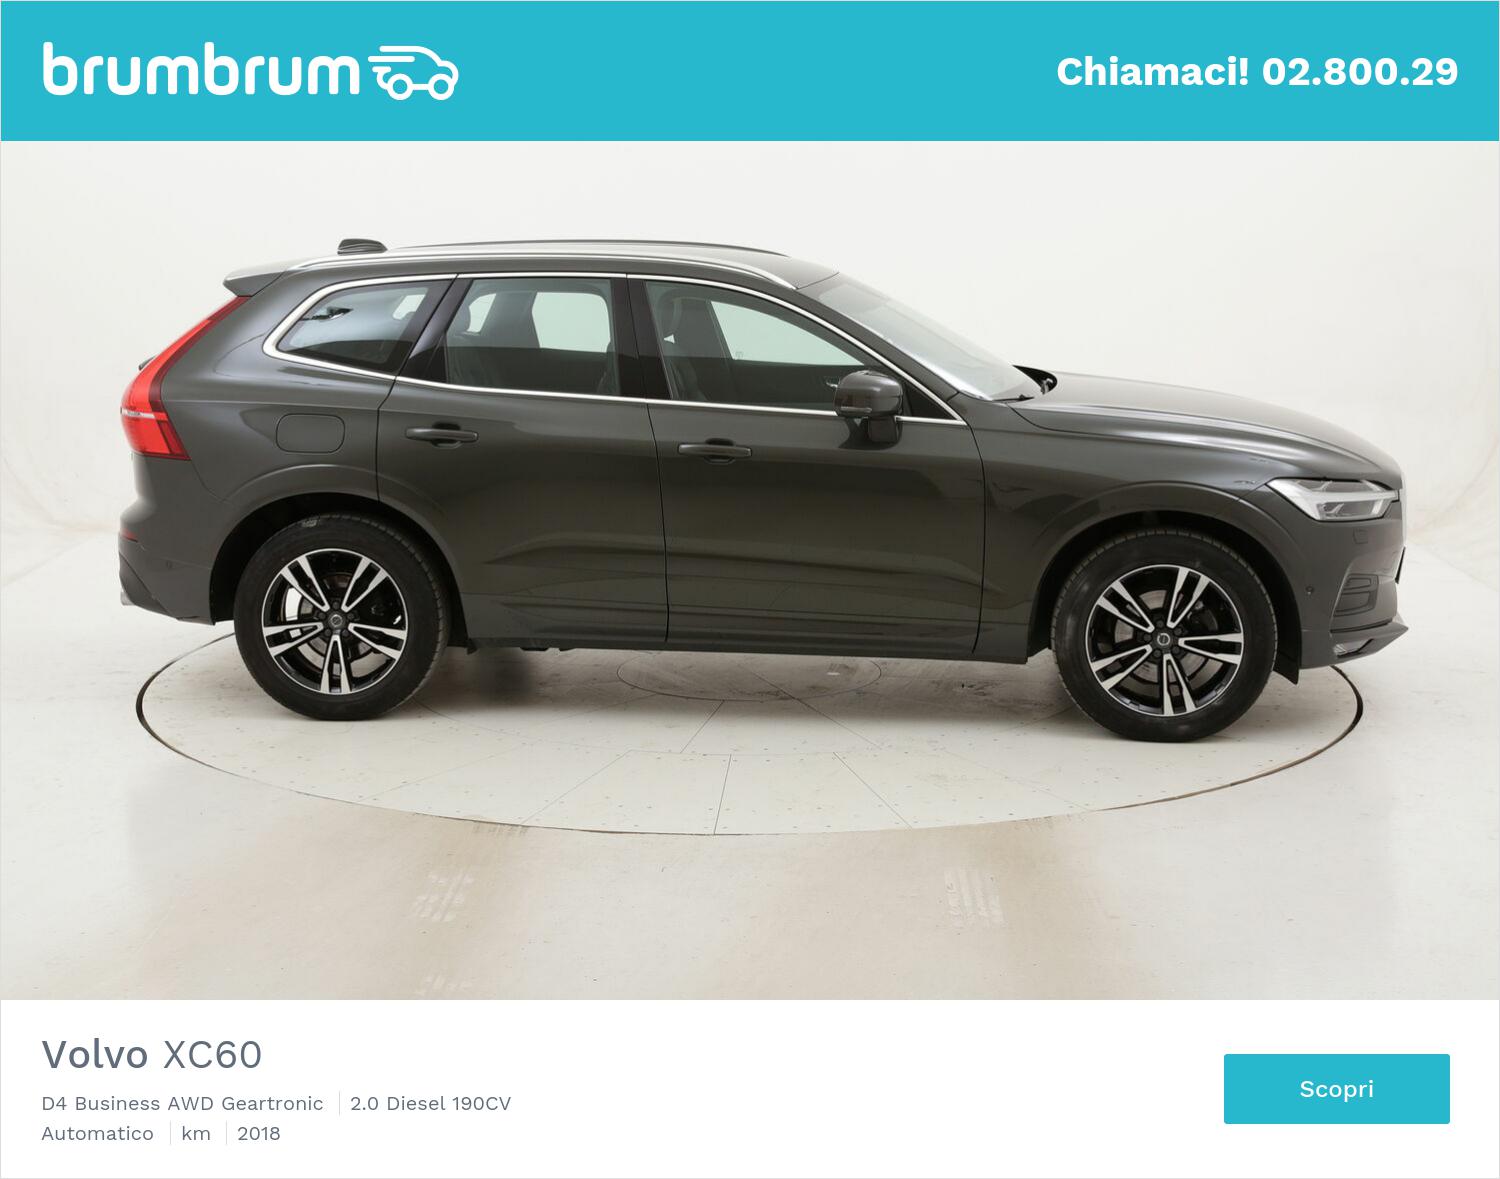 Volvo XC60 D4 Business AWD Geartronic usata del 2018 con 68.506 km | brumbrum